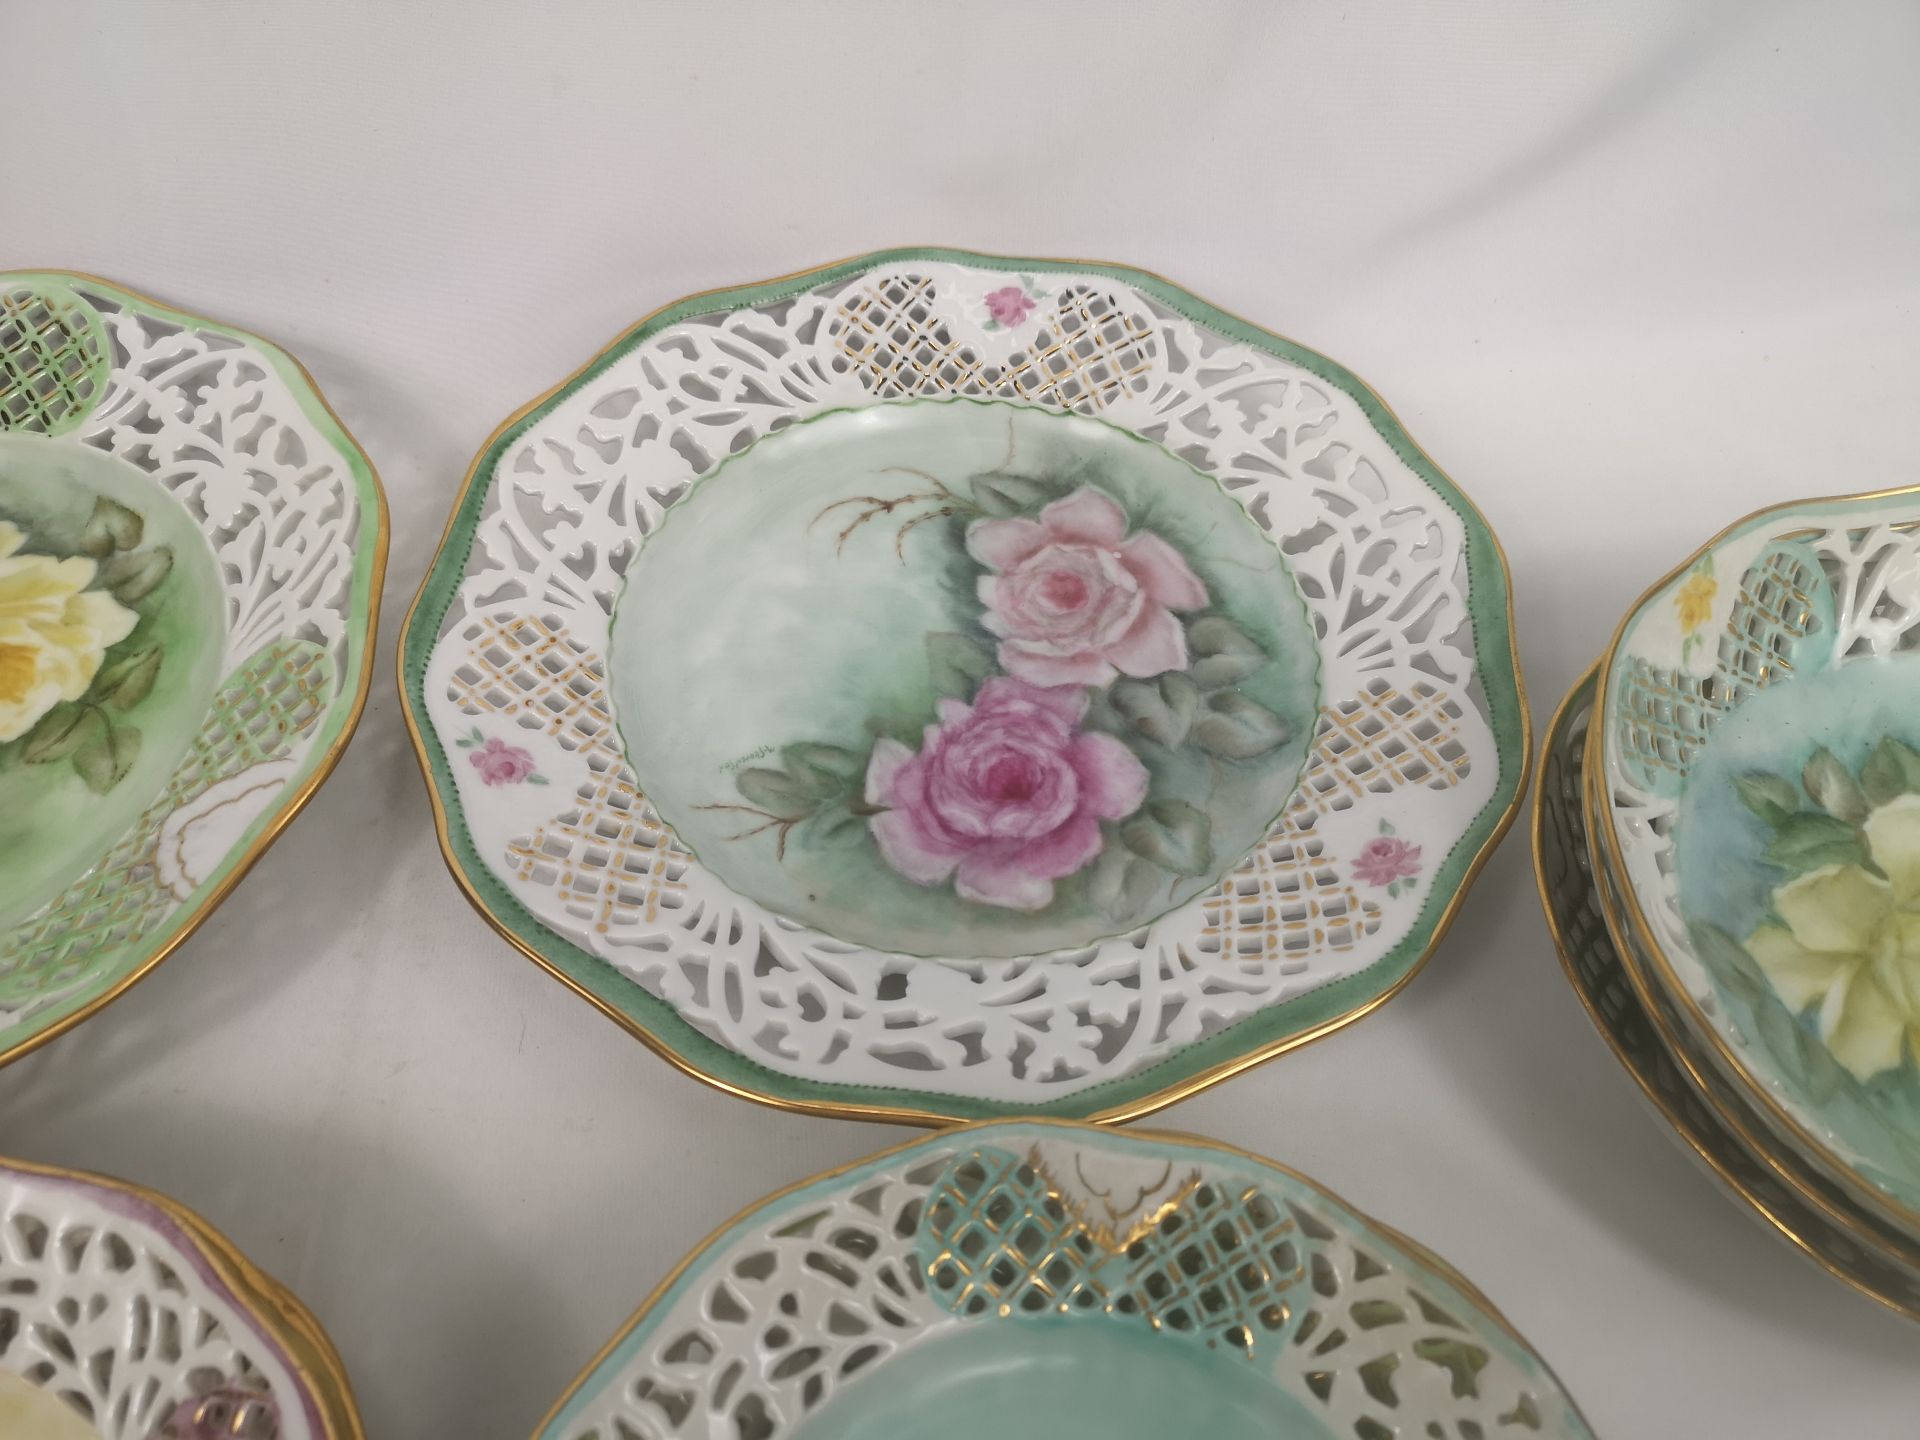 Quantity of hand painted plates and bowls by Marjorie Stevenson - Image 6 of 8